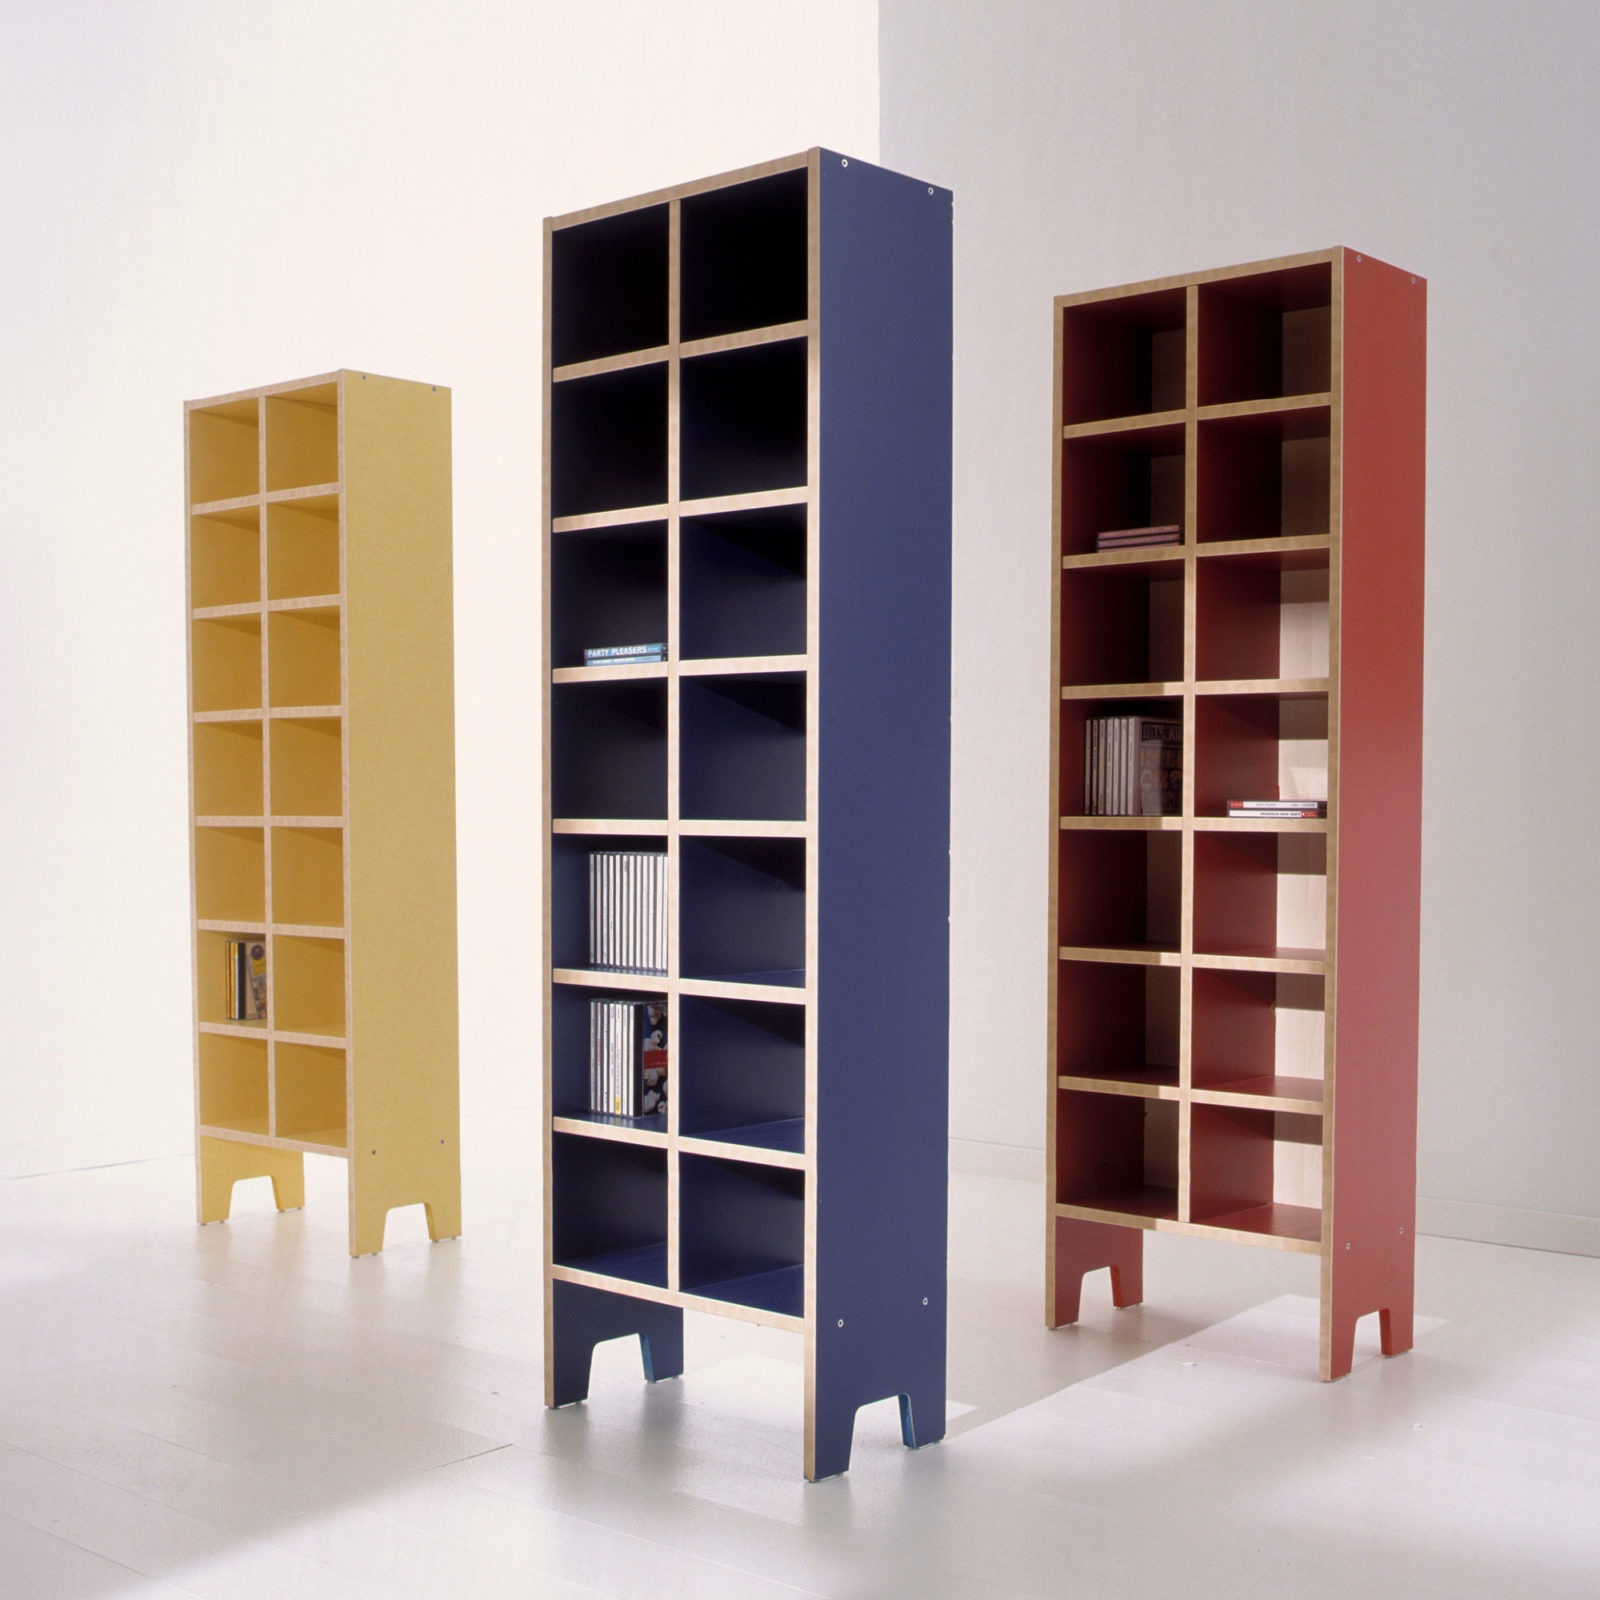 Three high free-standing ROBIN shelves made of dyed particleboard – in yellow, red and blue, with birch-coloured edging.